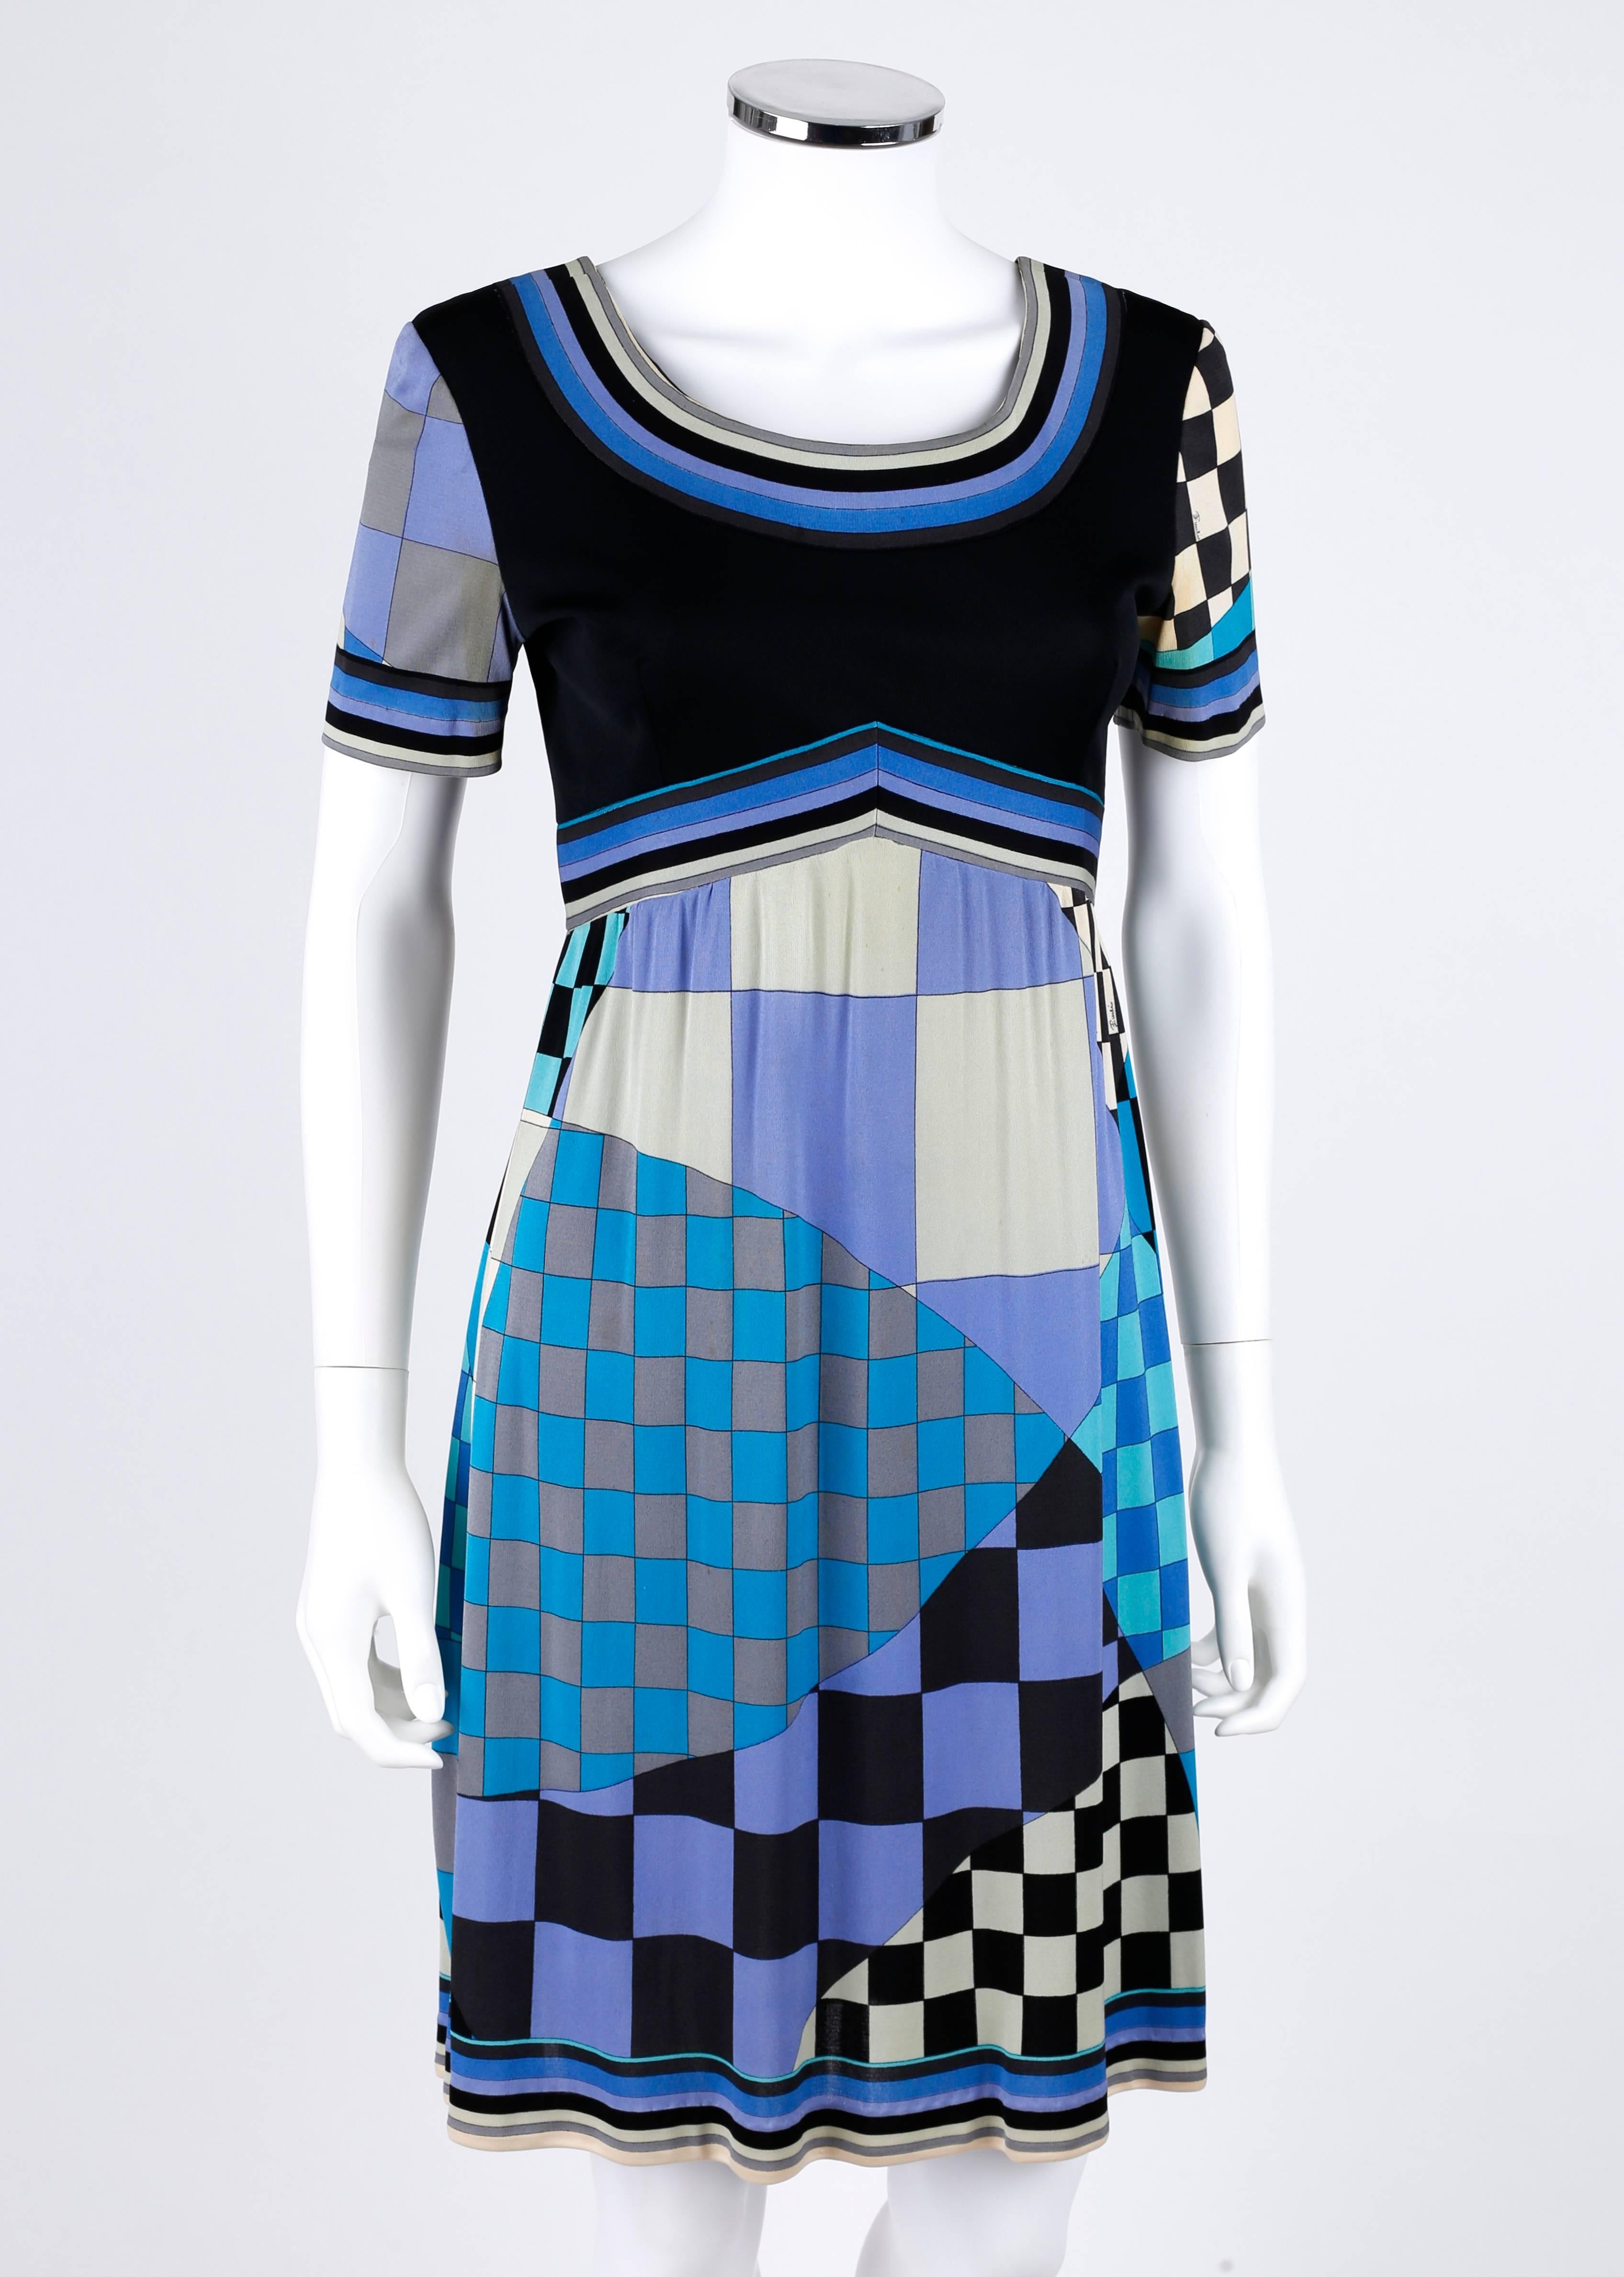 Vintage c.1960's Emilio Pucci for Saks Fifth Avenue silk jersey dress. Black bodice with short sleeves. Checkerboard signature print skirt and striped boarder trim in shades of blue, black, and gray. Empire waistline. Low scoop neckline. Side seam